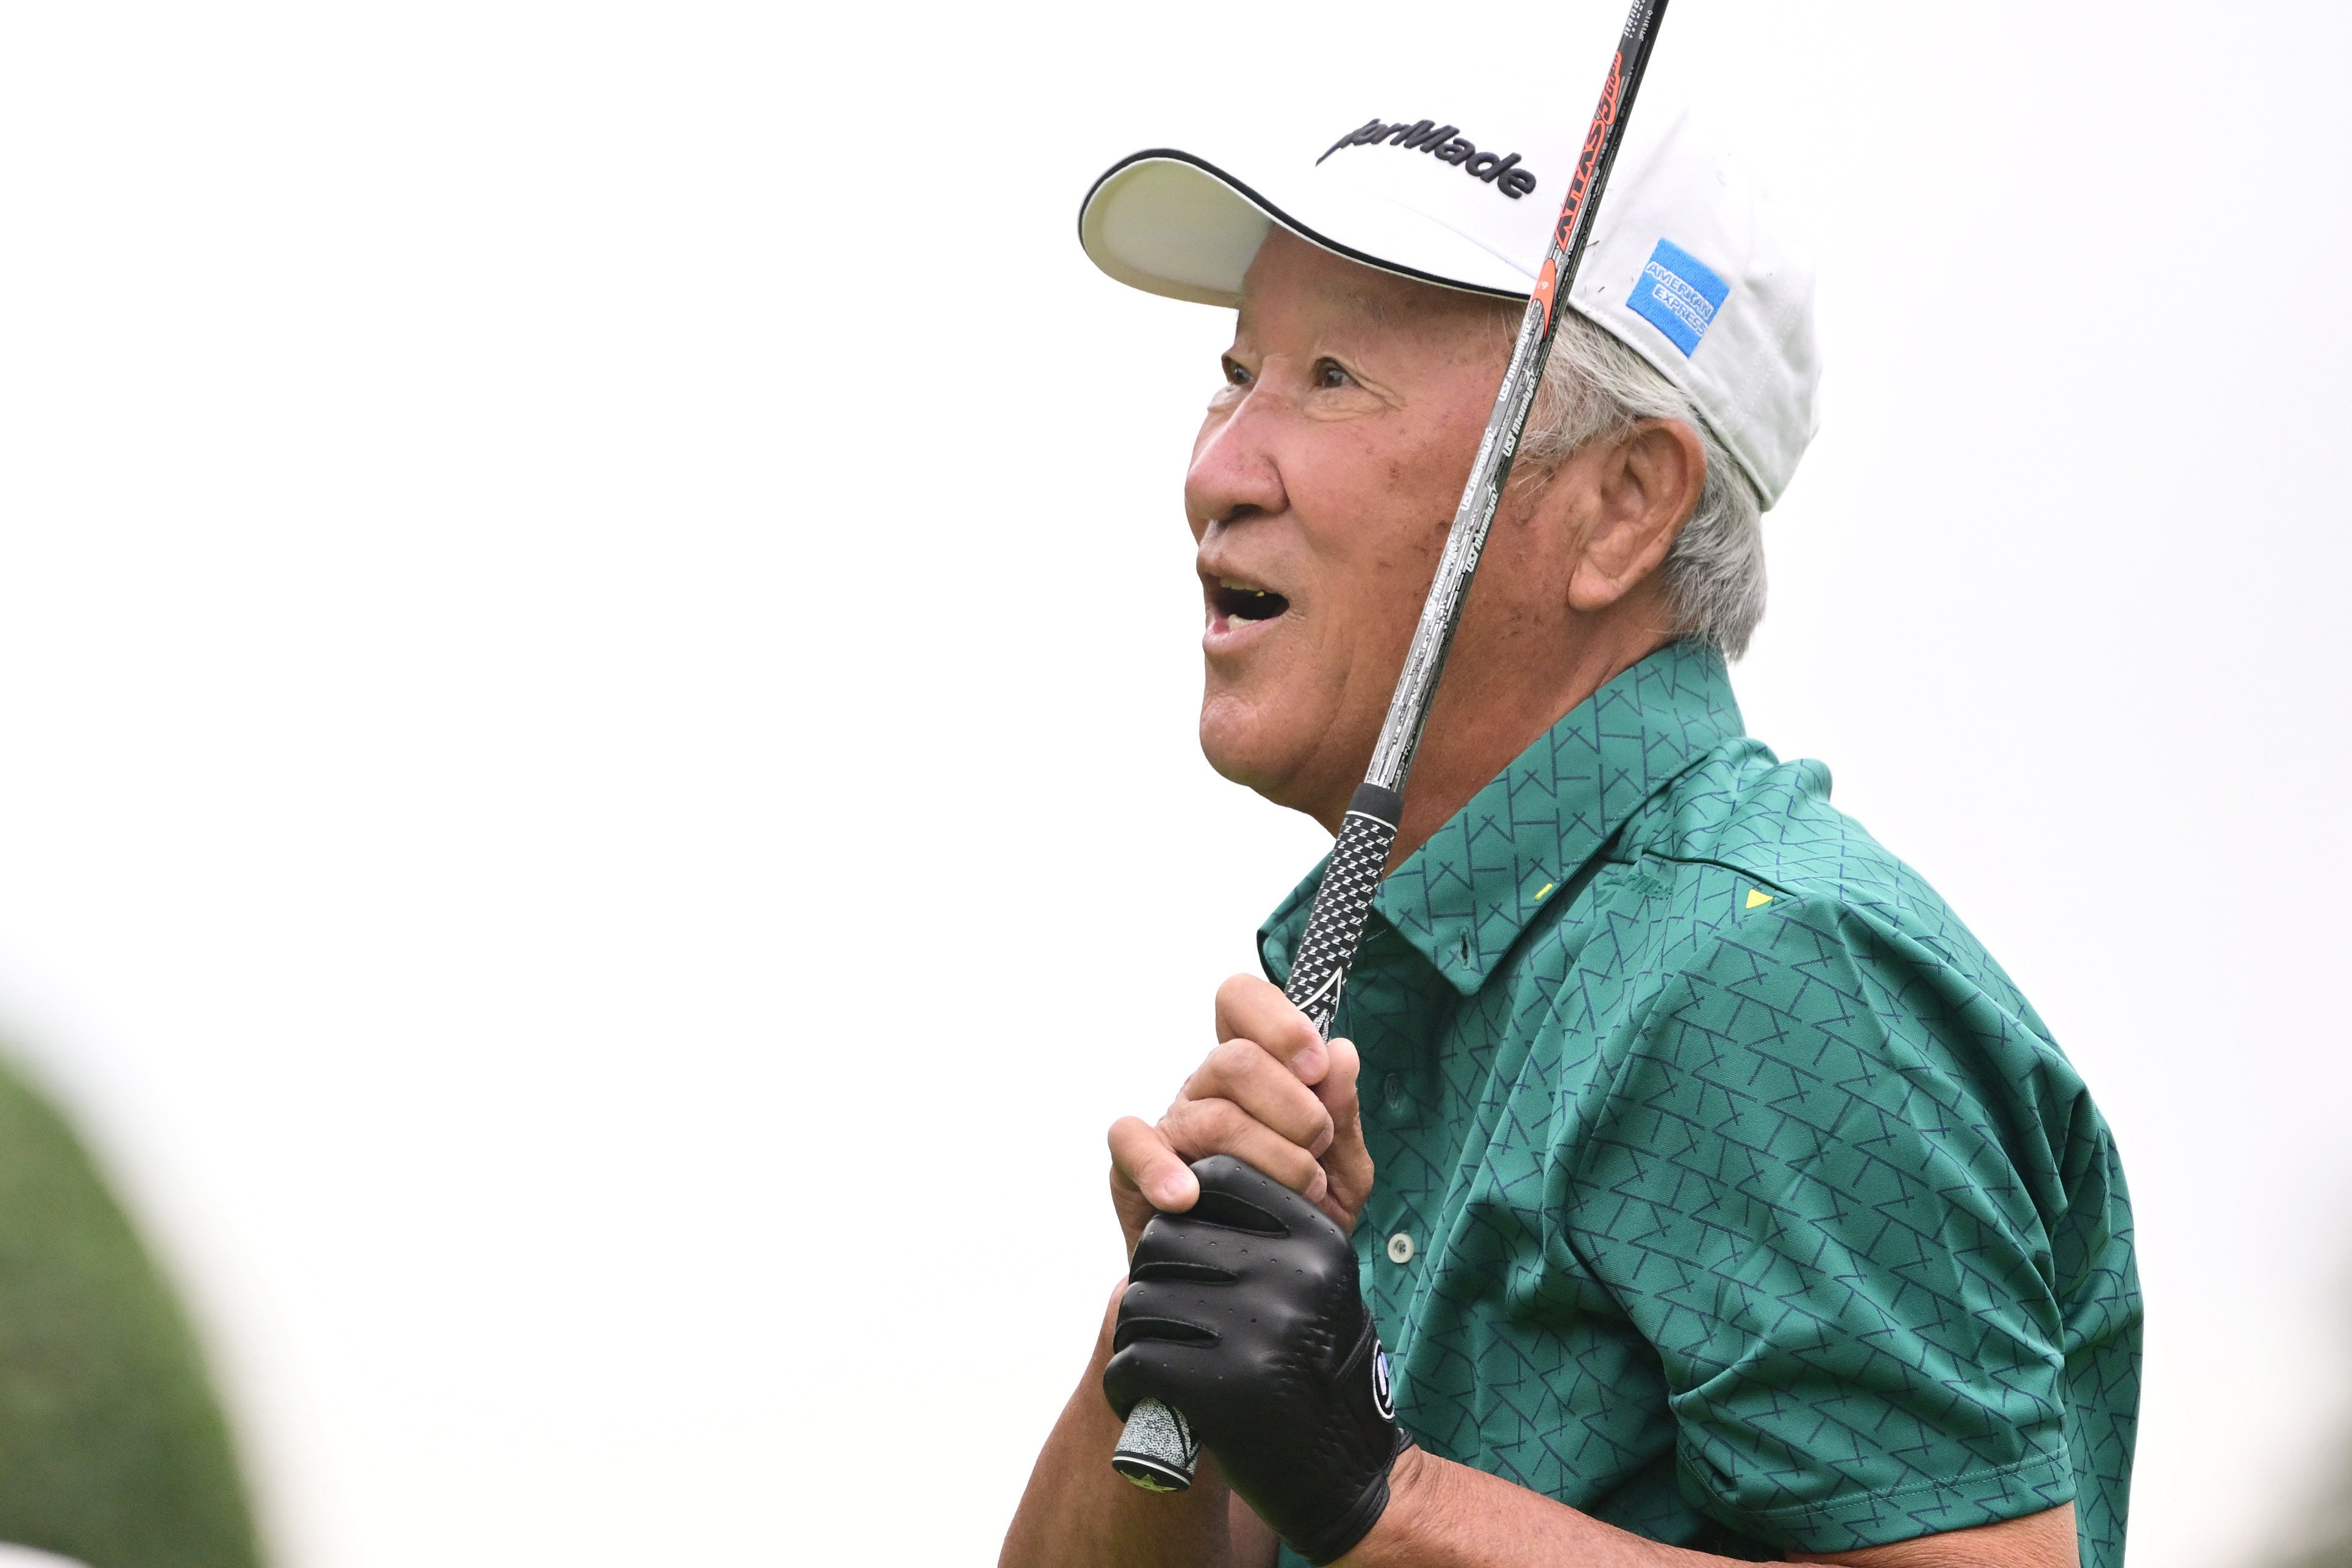 Isao Aoki hits his tee shot on the 1st hole during the ZOZO Championship pro-am at Accordia Golf Narashino Country Club on October 12, 2022. Photo: Getty Images